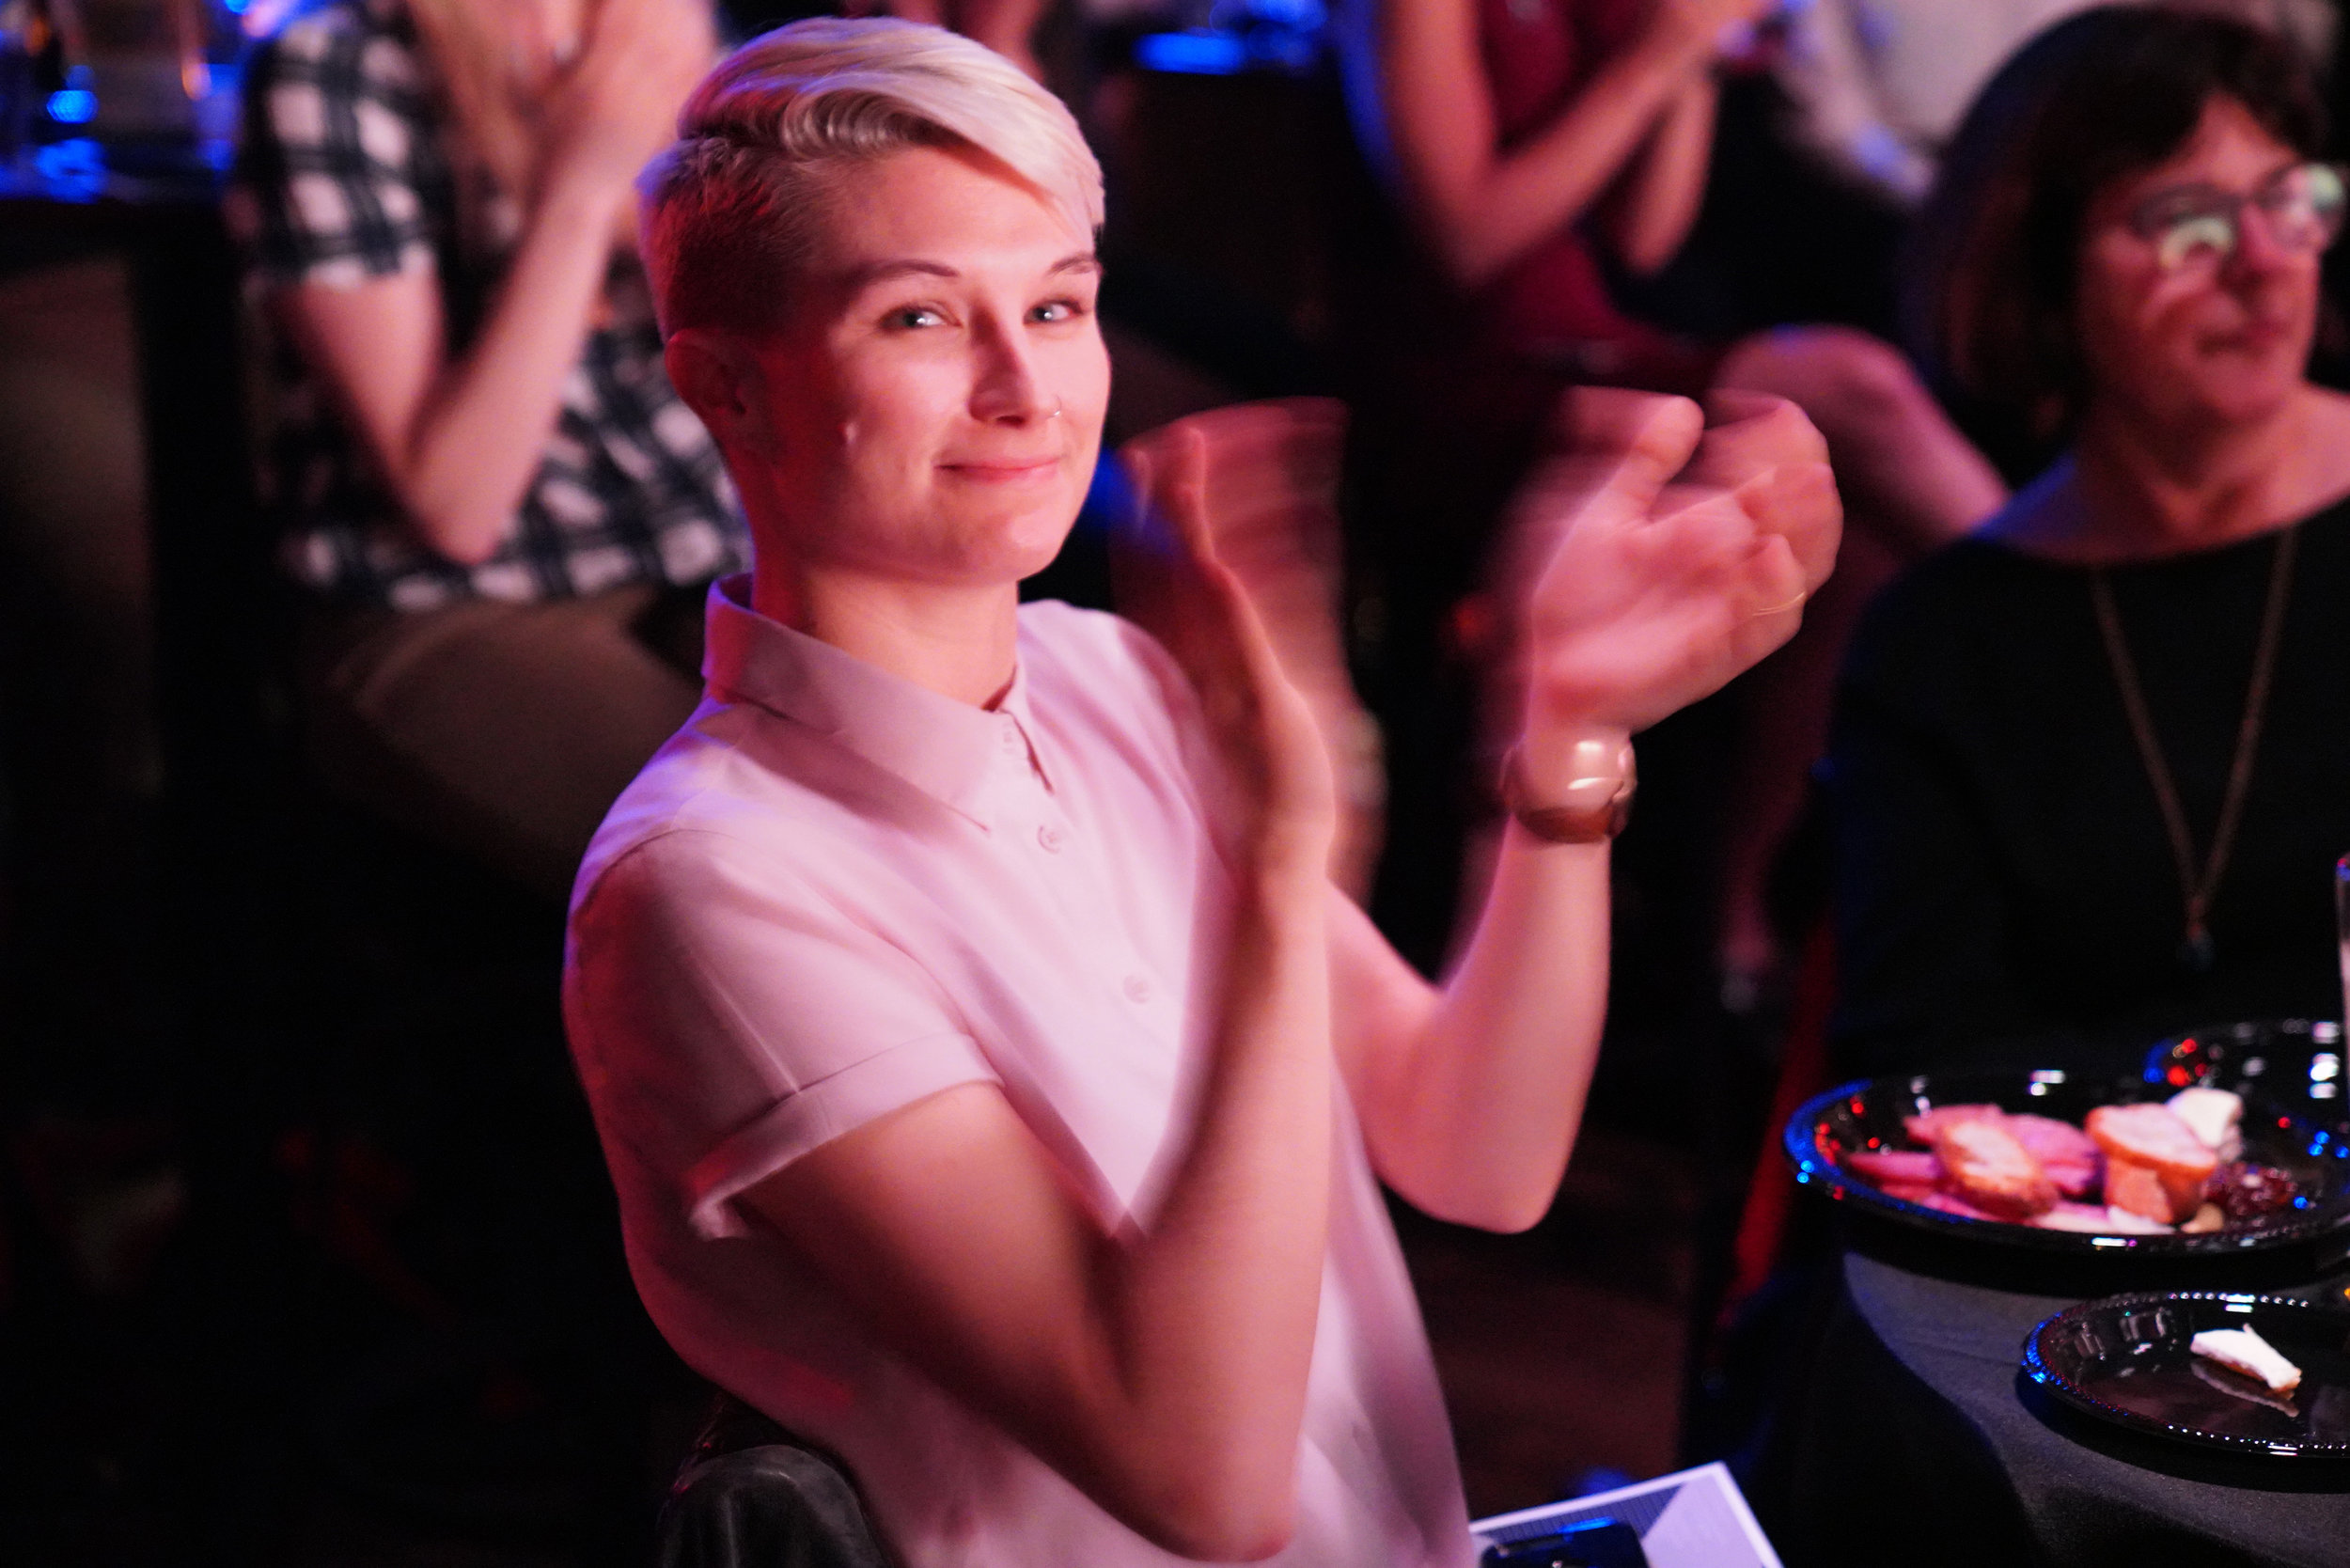  Arielle’s wife, Meredith, applauds her spouse! 